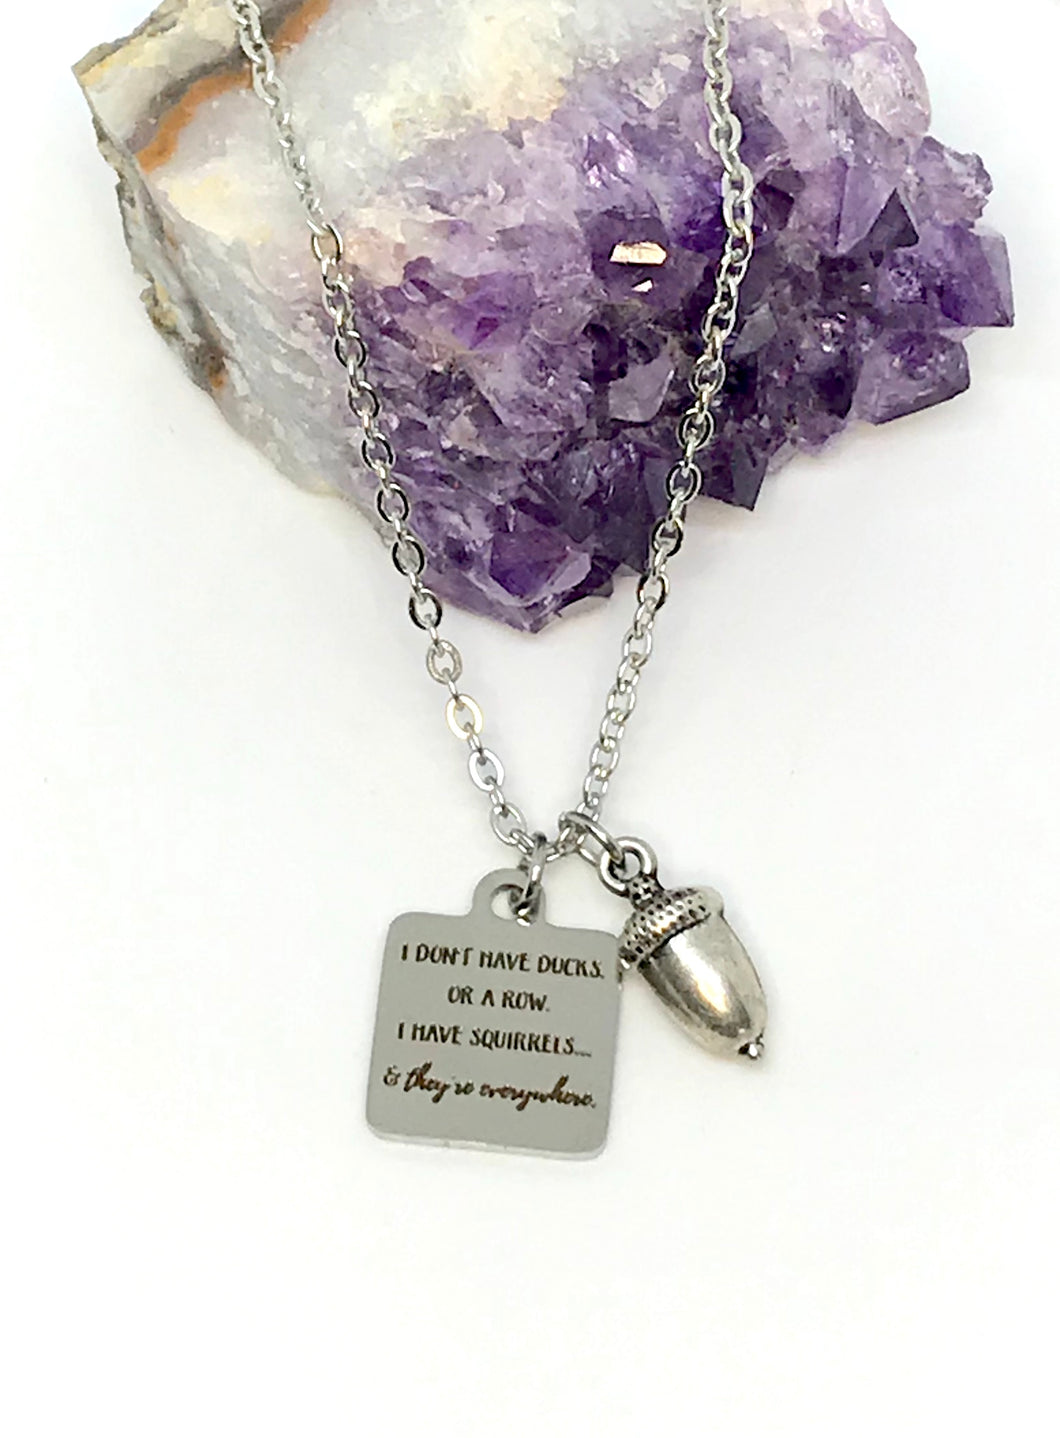 “I don’t have ducks or a row” 3-in-1 Charm Necklace (Stainless Steel)